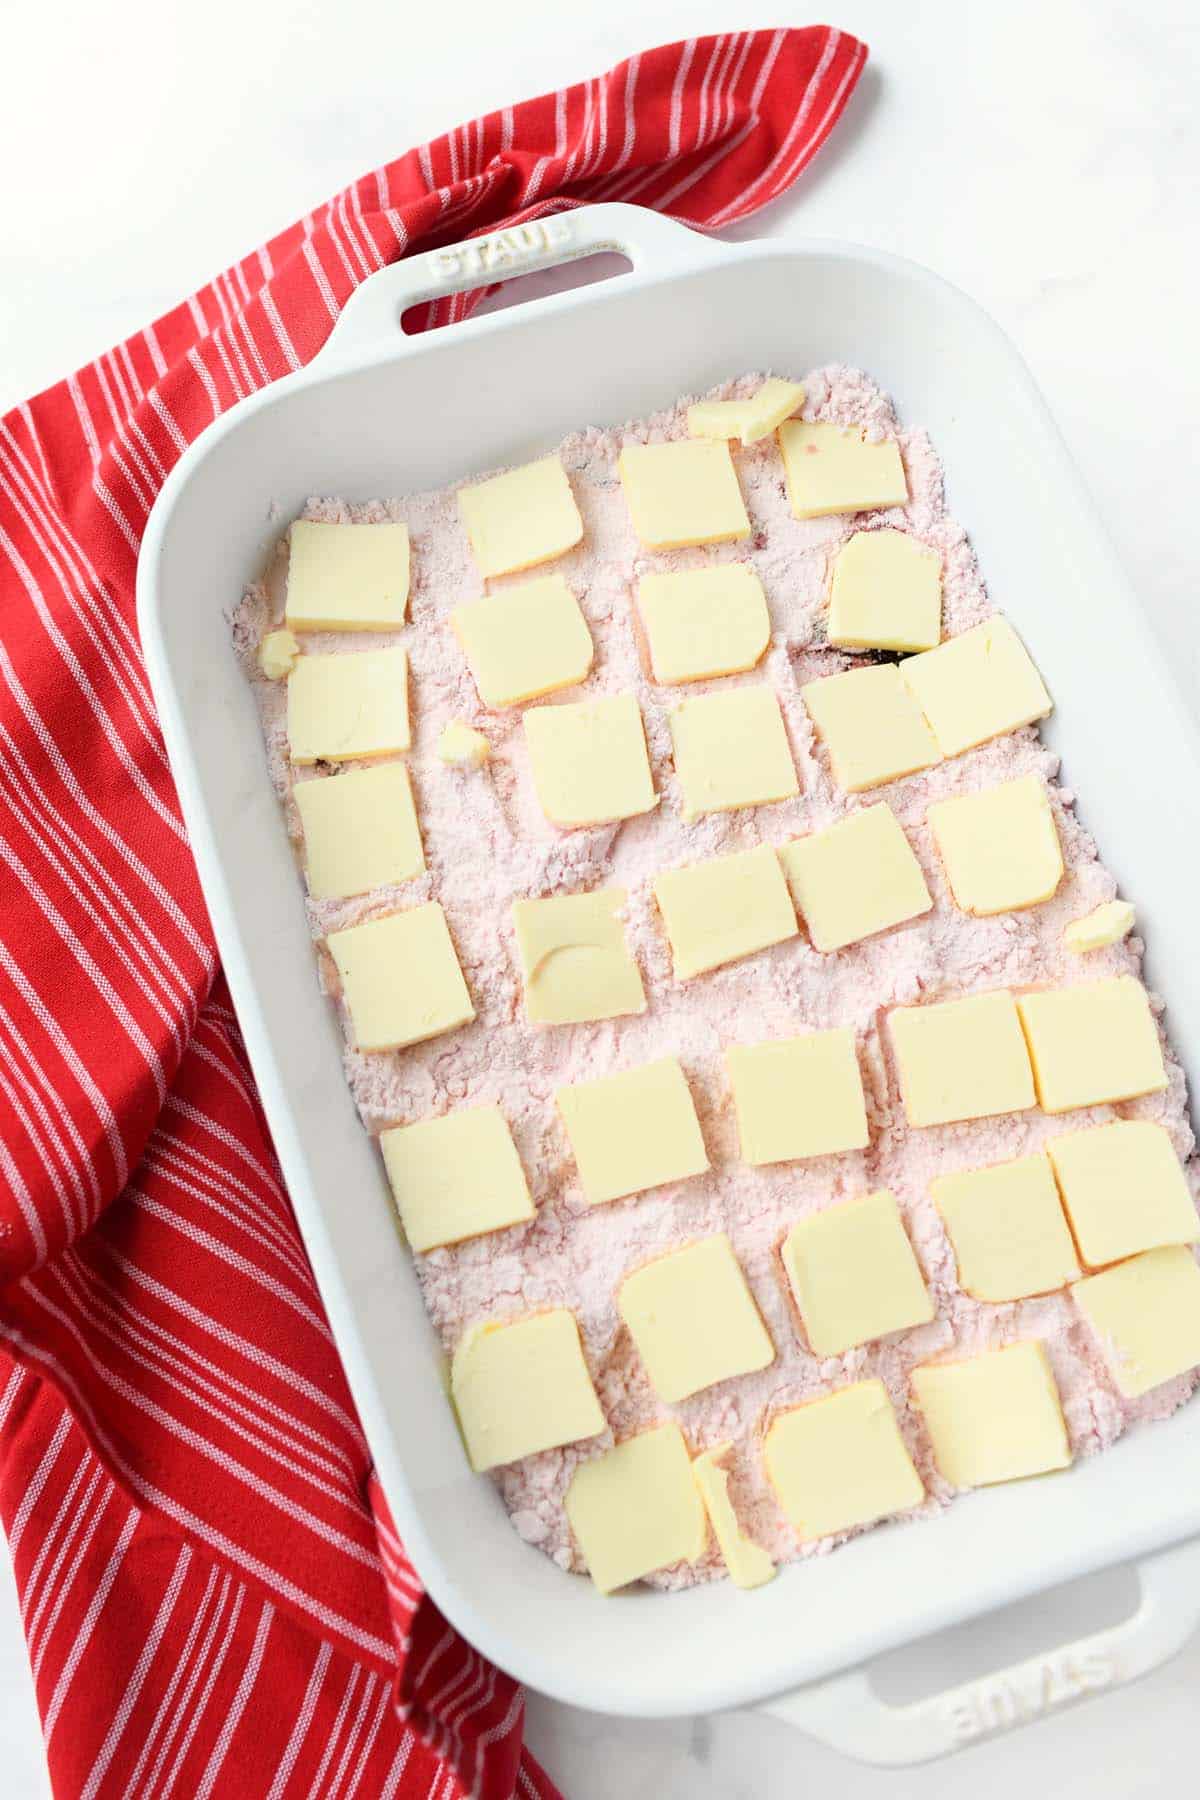 Butter pats over pink cake mix.